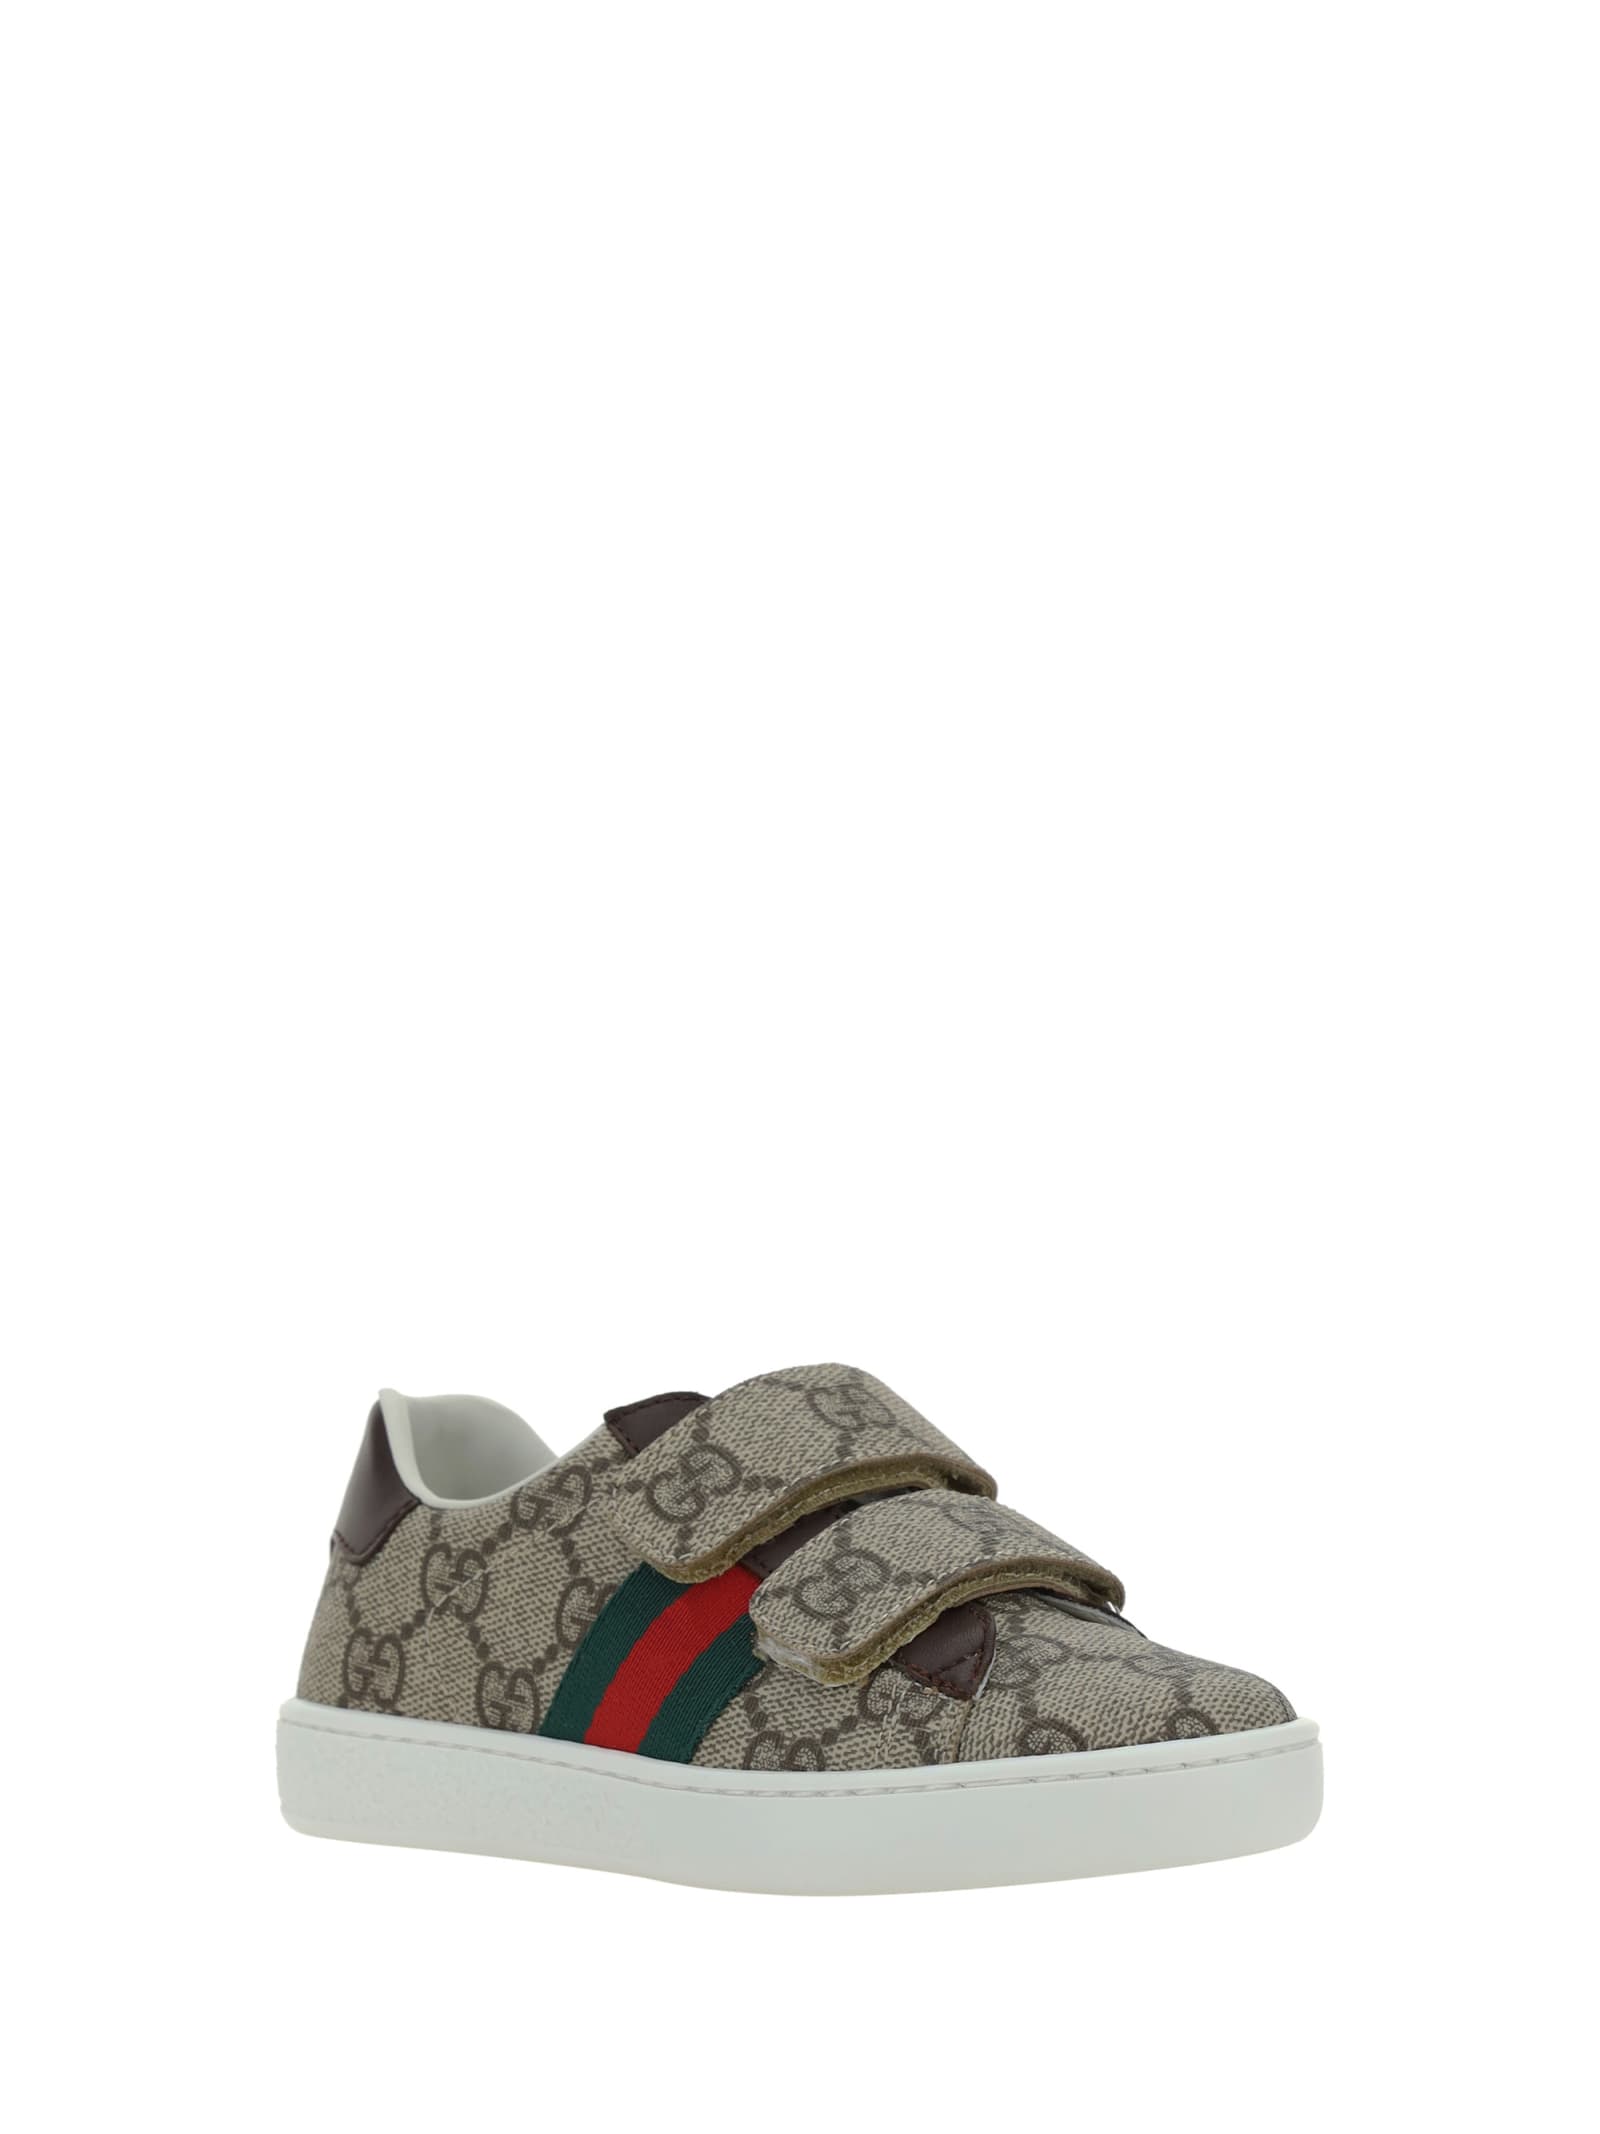 Shop Gucci Sneakers For Boy